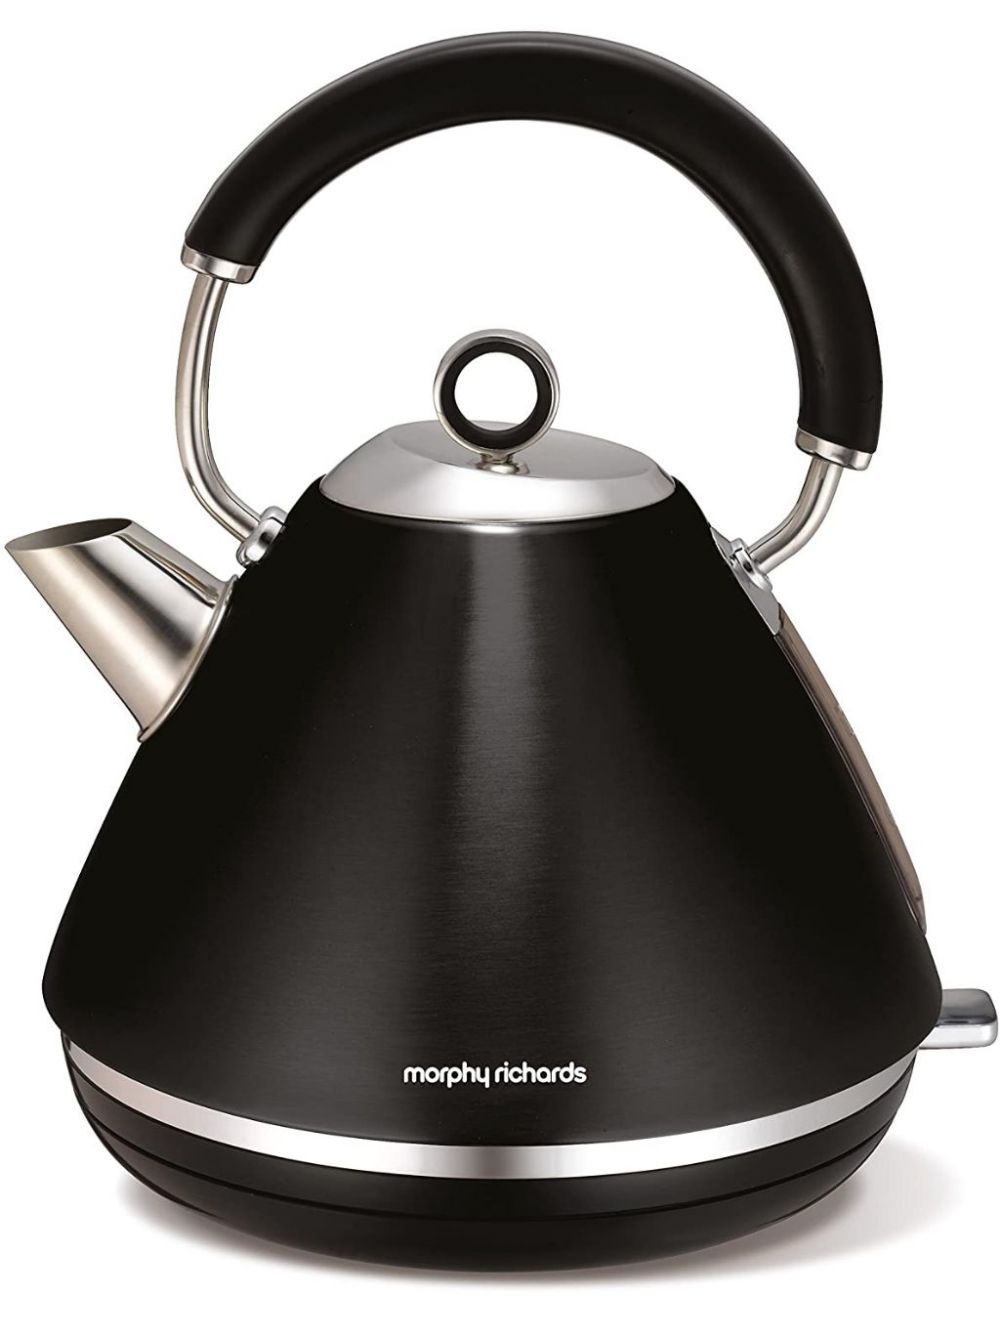 Morphy Richards Accents Pyramid Kettle, 1.5 L - Black-102002